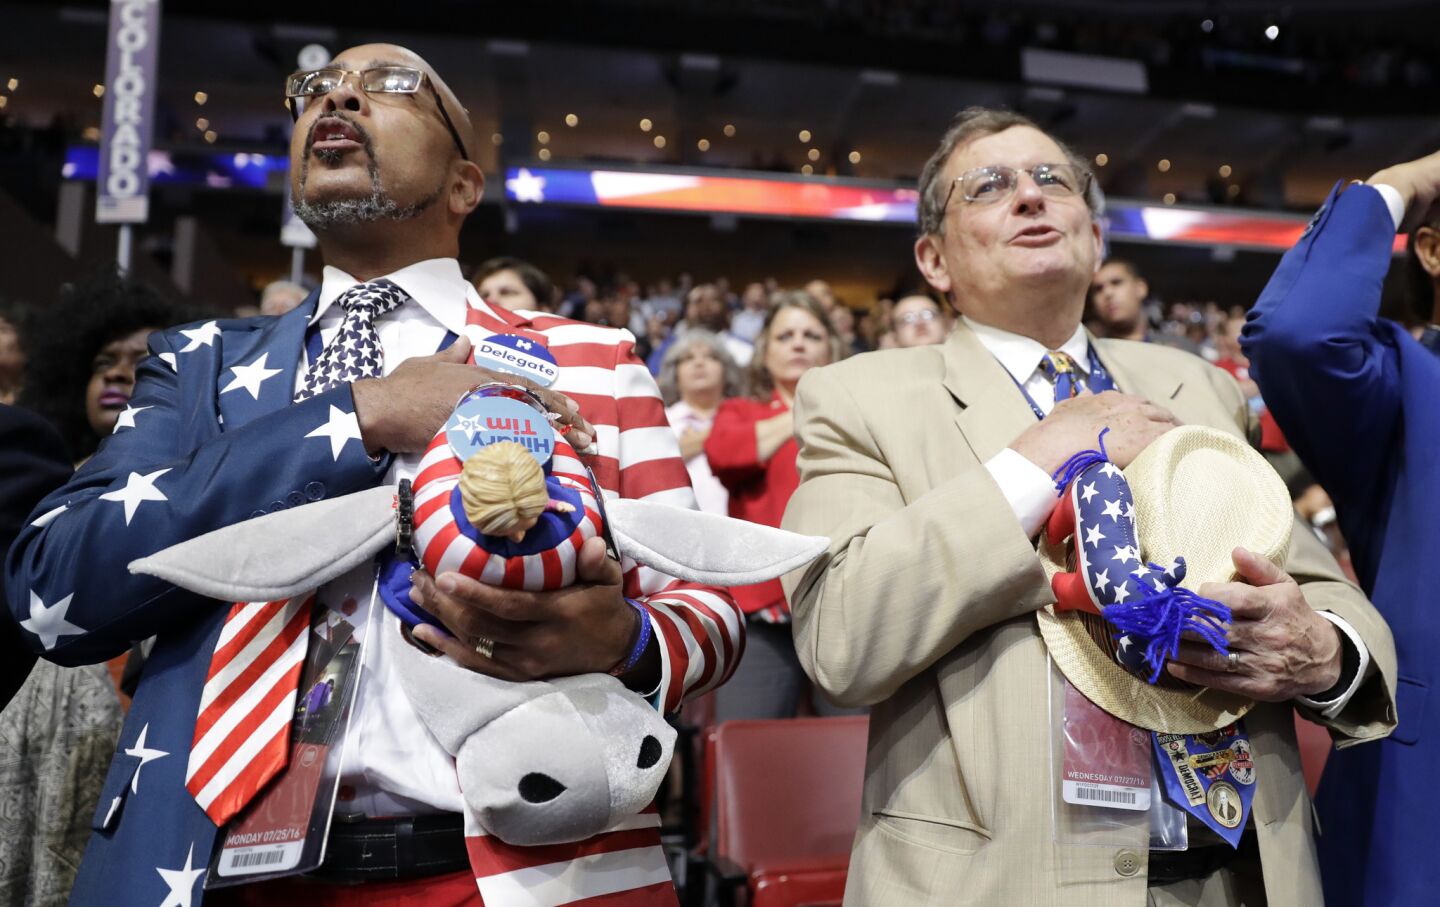 Louisiana delegates Rodney Mcfarland and Jim Harlan sing the national anthem during the third day session of the 2016 Democratic National Convention in Philadelphia on Wednesday.